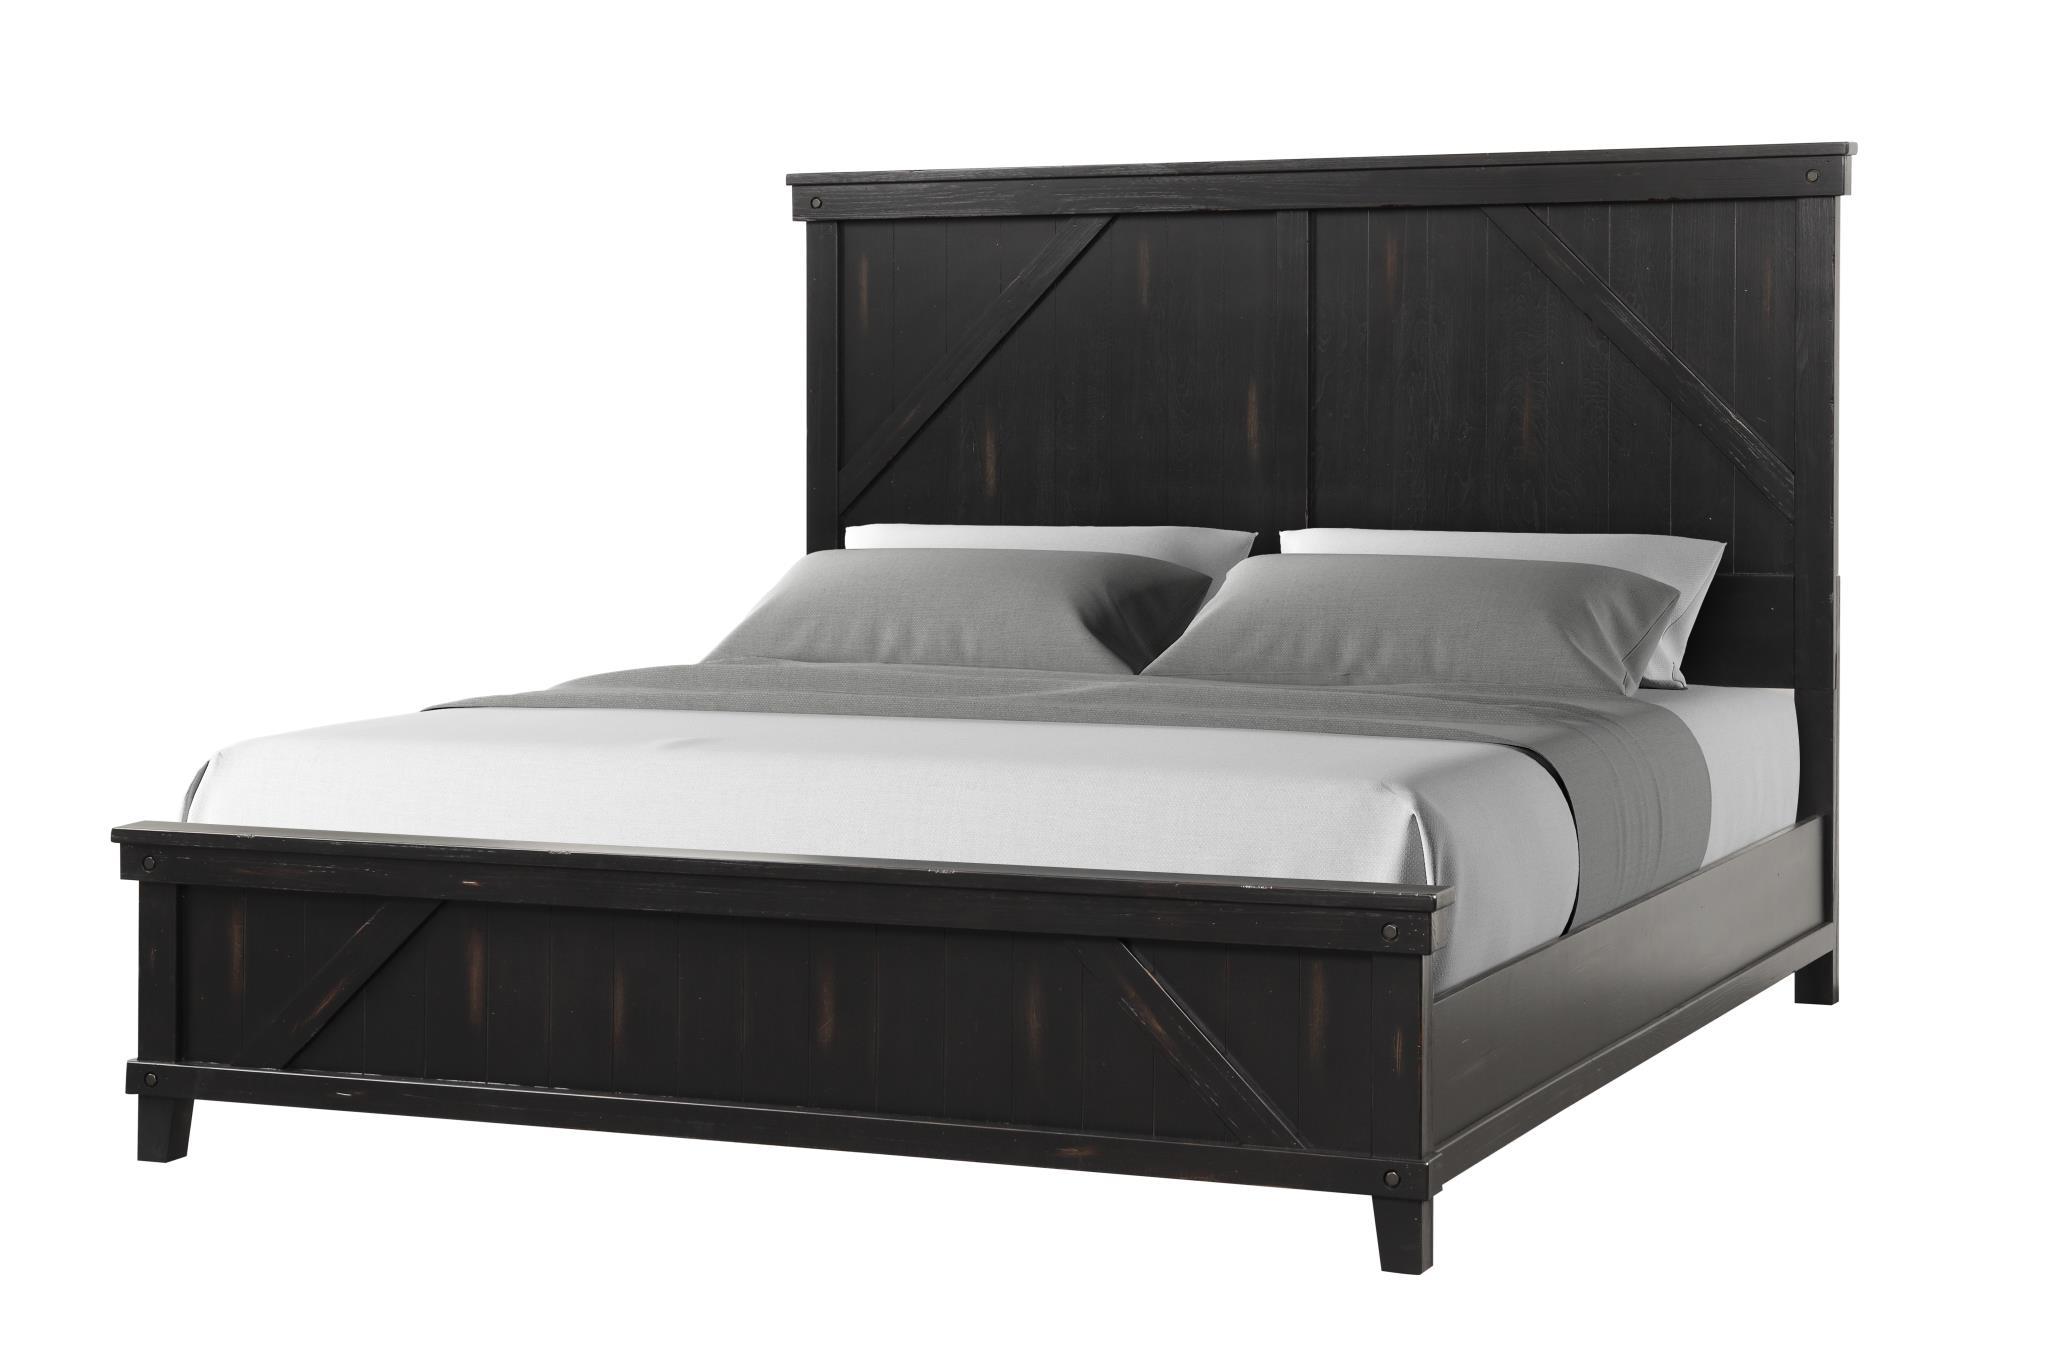 Classic, Transitional Panel Bed SPRUCE CREEK 1708-110 1708-110 in Black 